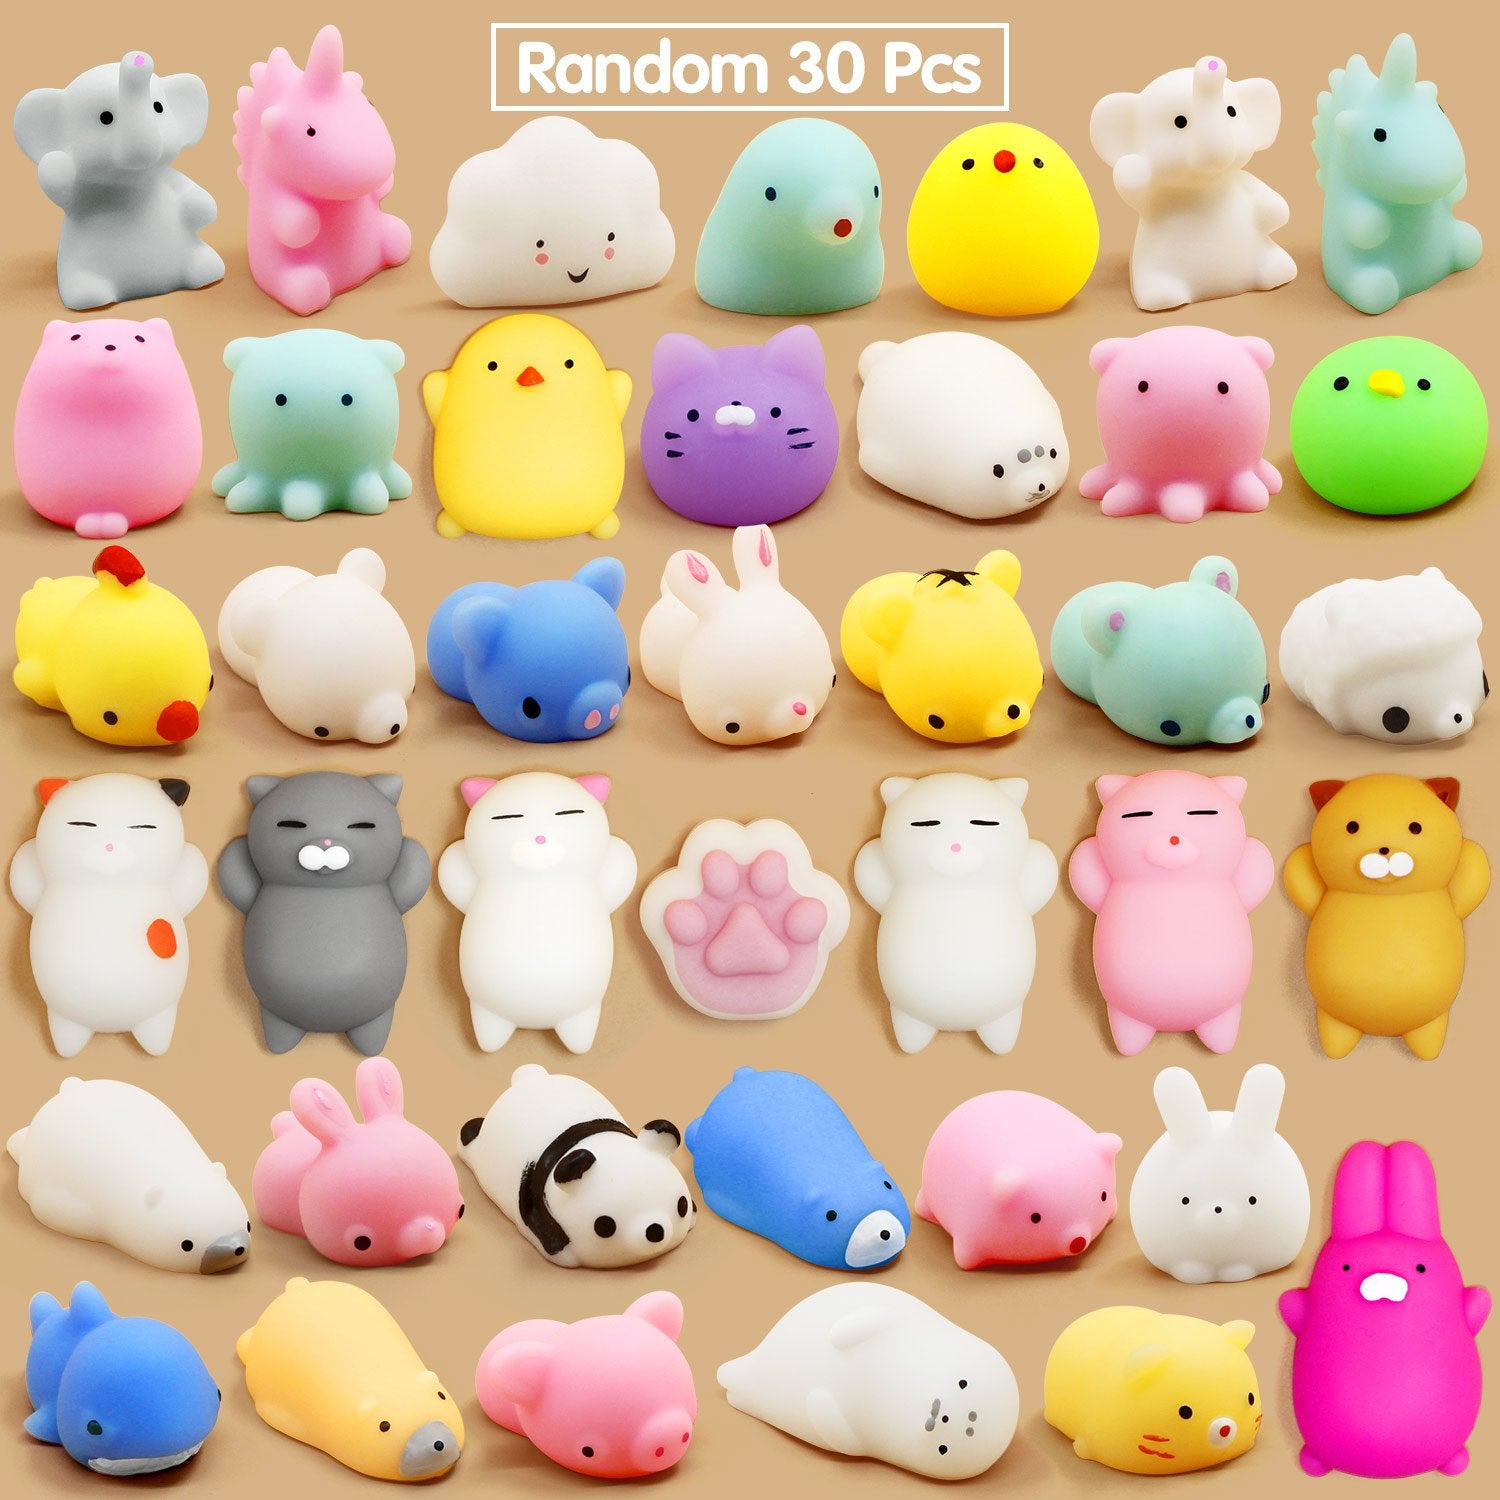 Calans Mochi Squishy Toys, 30 Pcs Mini Squishy Party Favors for kids Animal Squishies Stress Relief Toys Cat Panda Unicorn Squishy Squeeze Toys Kawaii Squishies Birthday Gifts for Boys & Girls Random